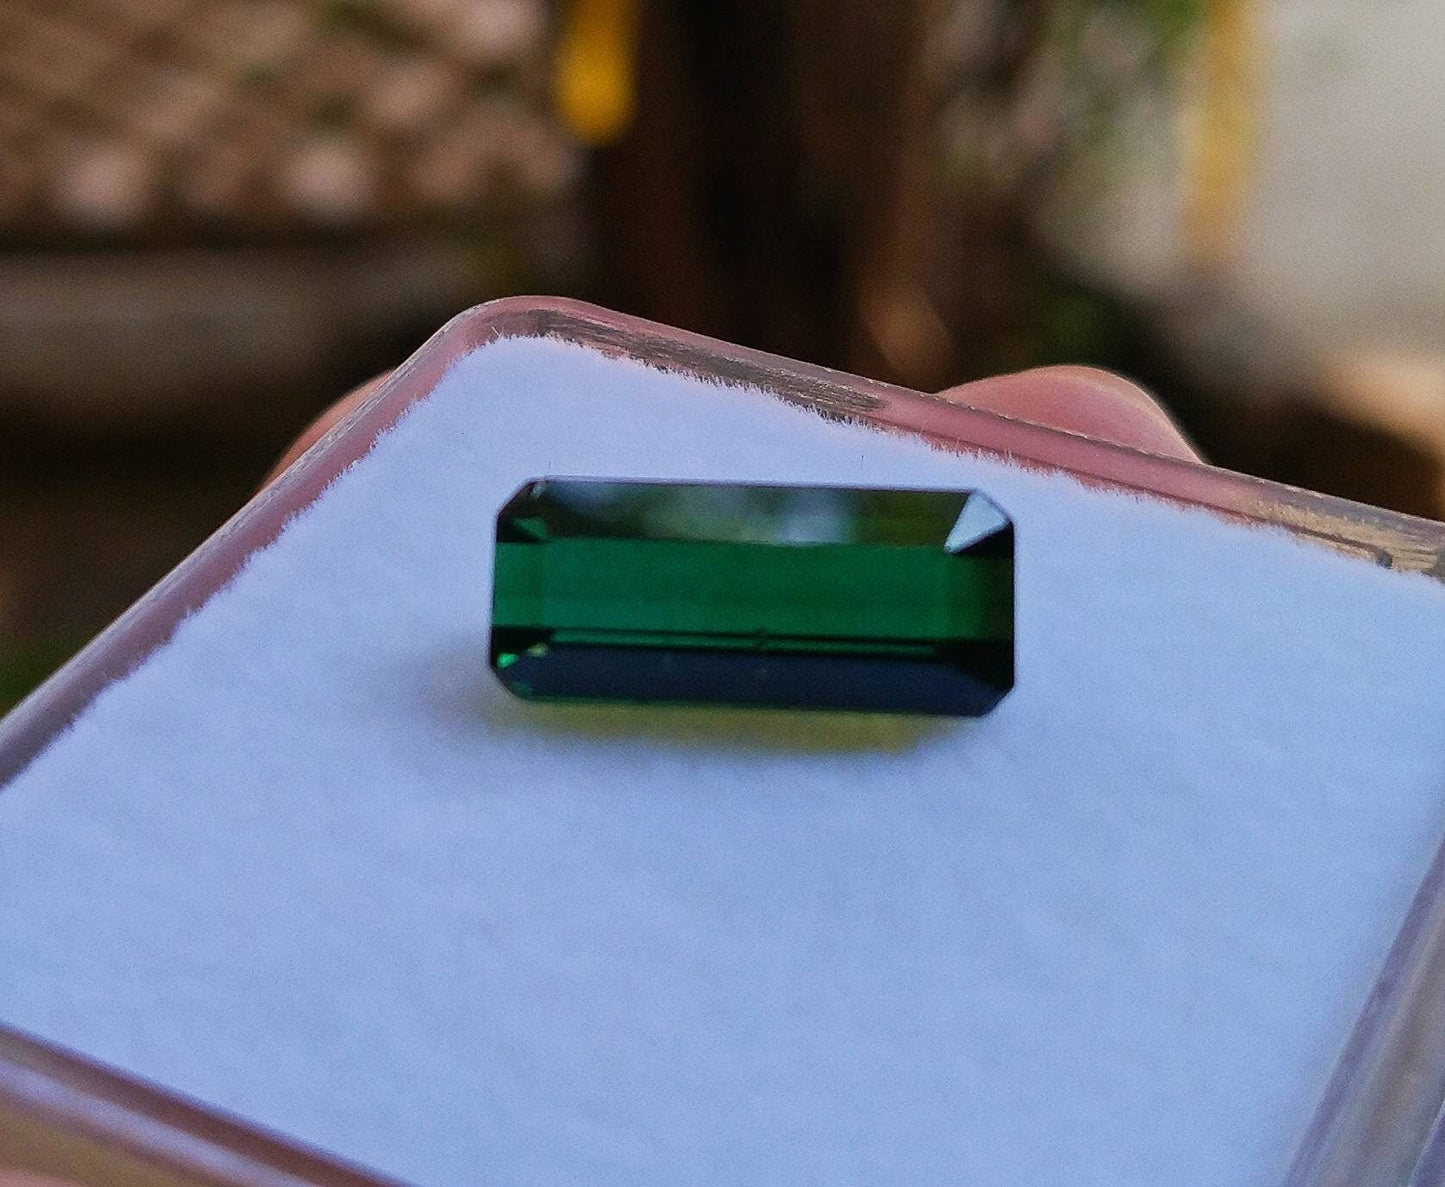 ARSAA GEMS AND MINERALSNatural top quality beautiful 4 carats clear green faceted radiant shape Tourmaline gem - Premium  from ARSAA GEMS AND MINERALS - Just $80.00! Shop now at ARSAA GEMS AND MINERALS